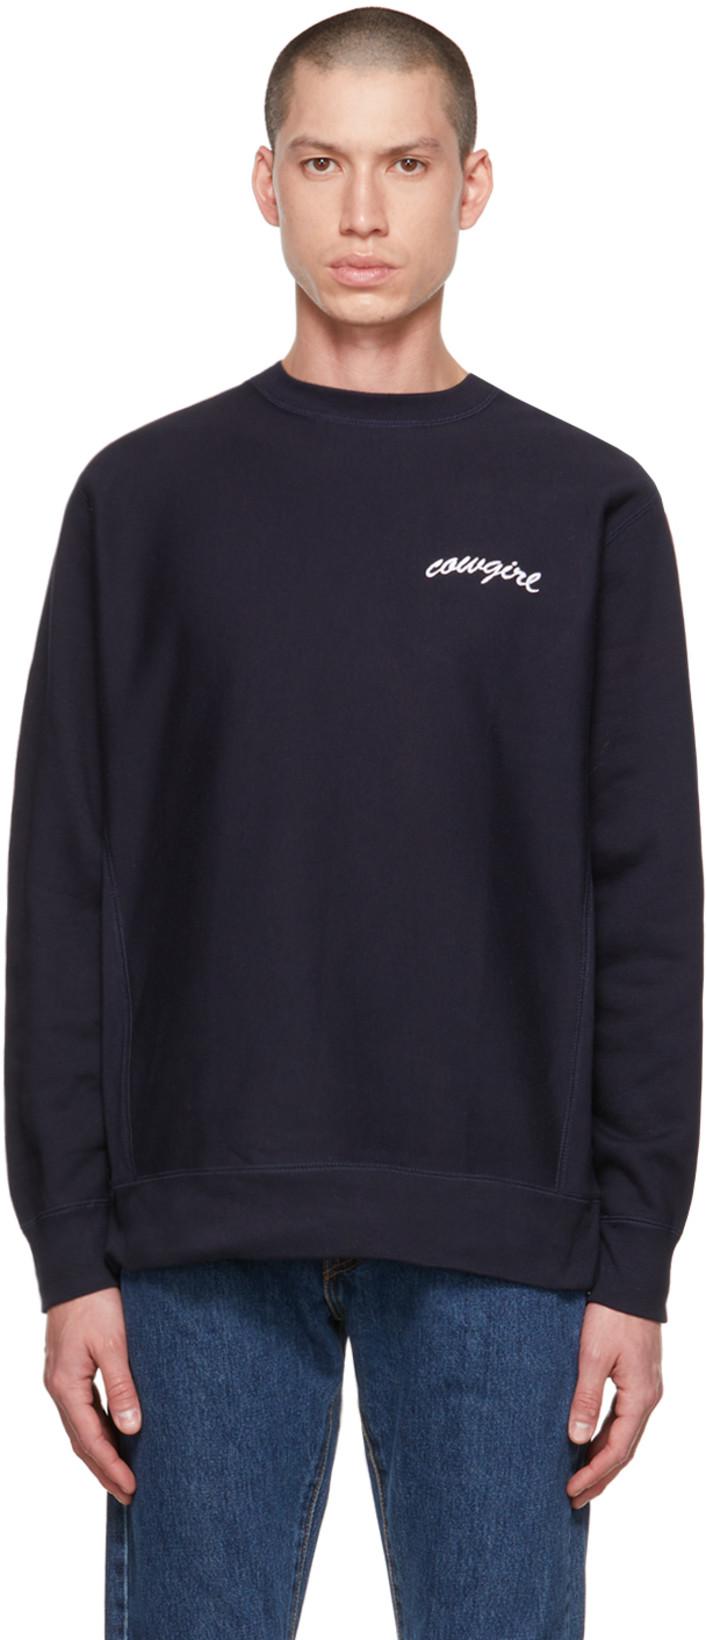 Navy Embroidered Sweatshirt by COWGIRL BLUE CO